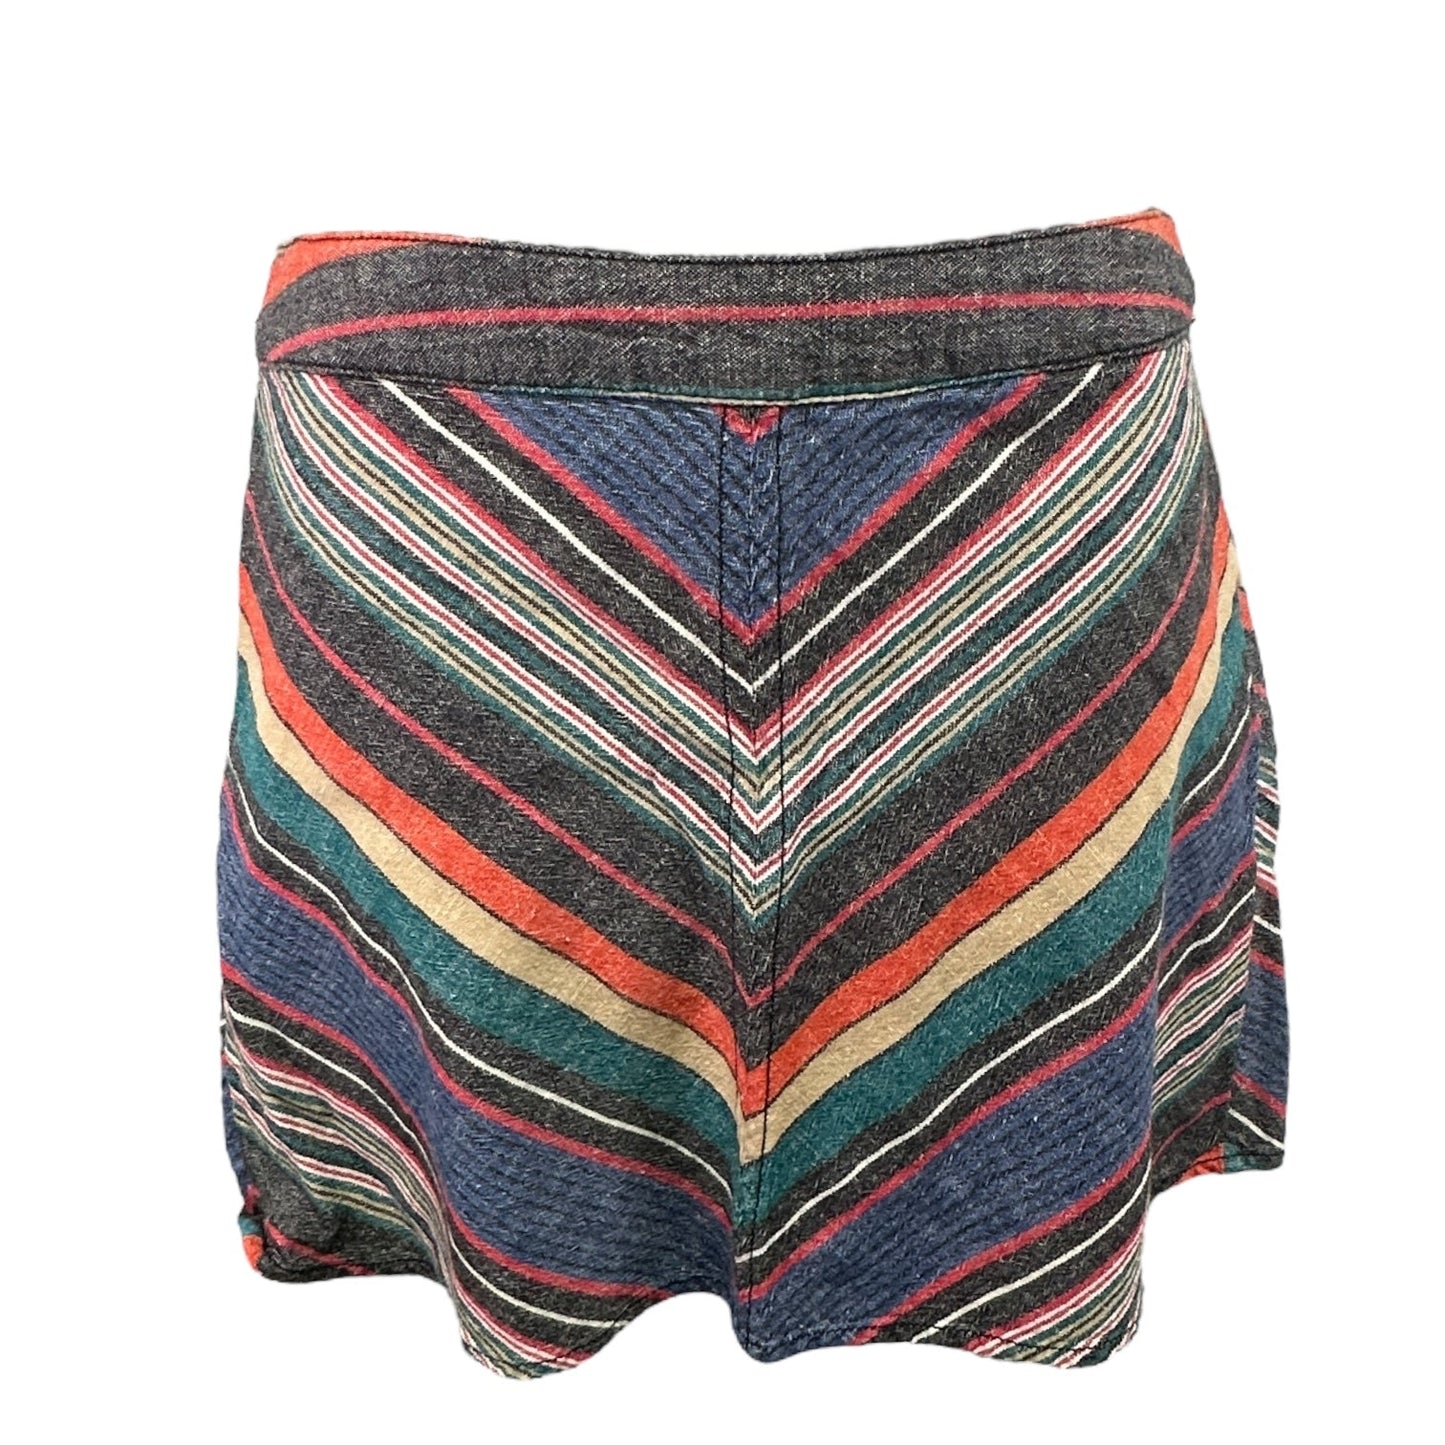 Yours Truly Mini Skirt Free People, Size 0